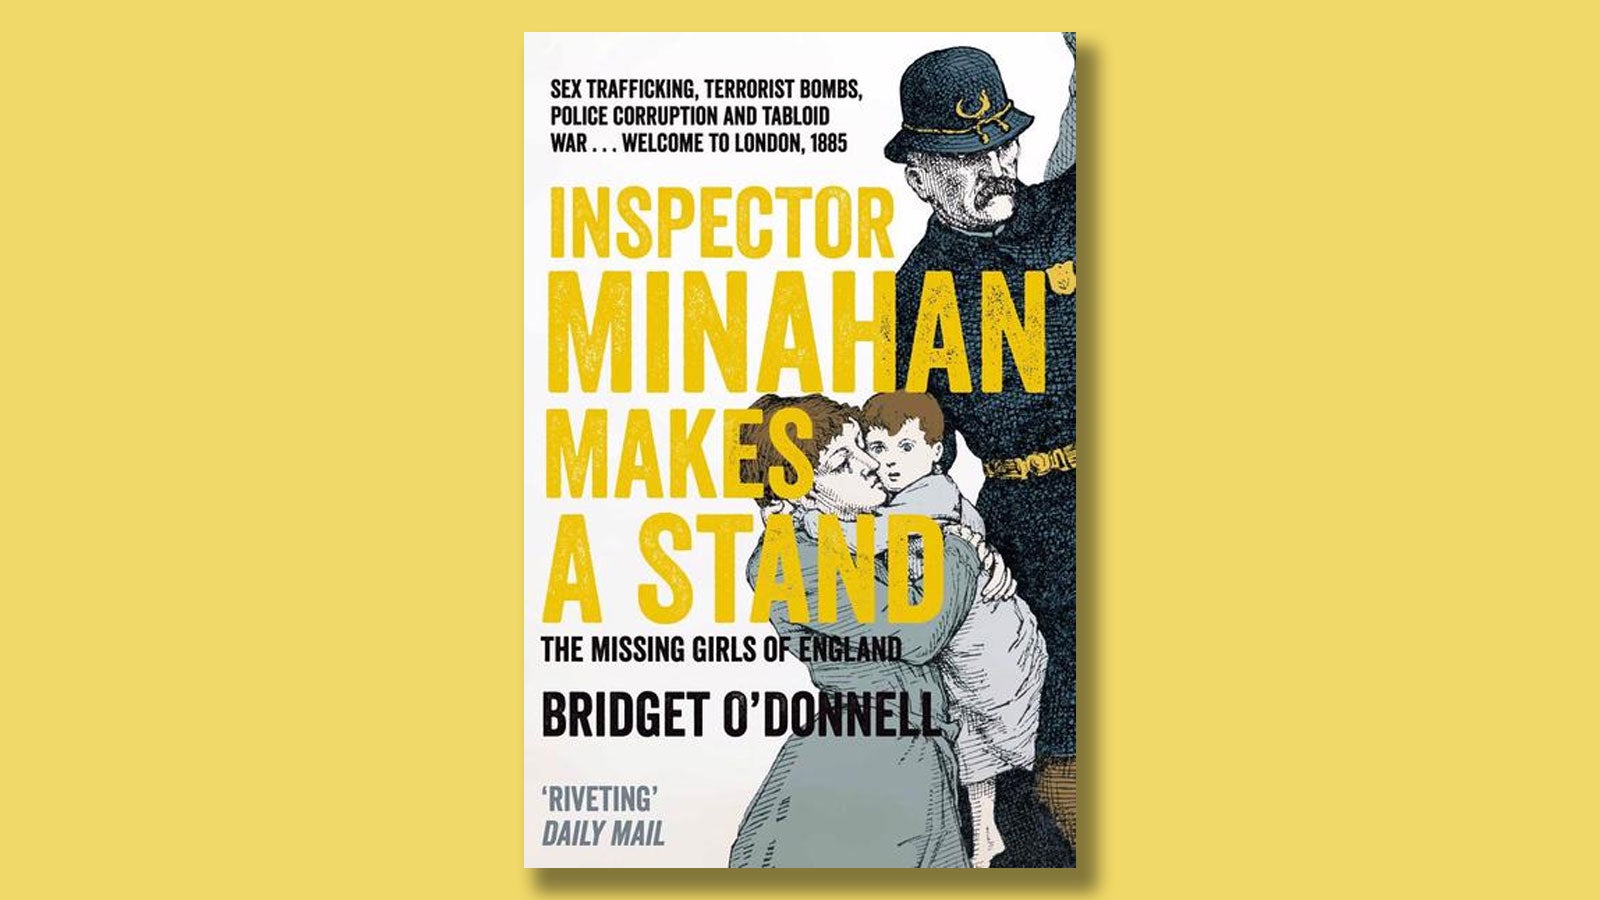 Inspector Minahan Makes a Stand book jacket against a yellow background.